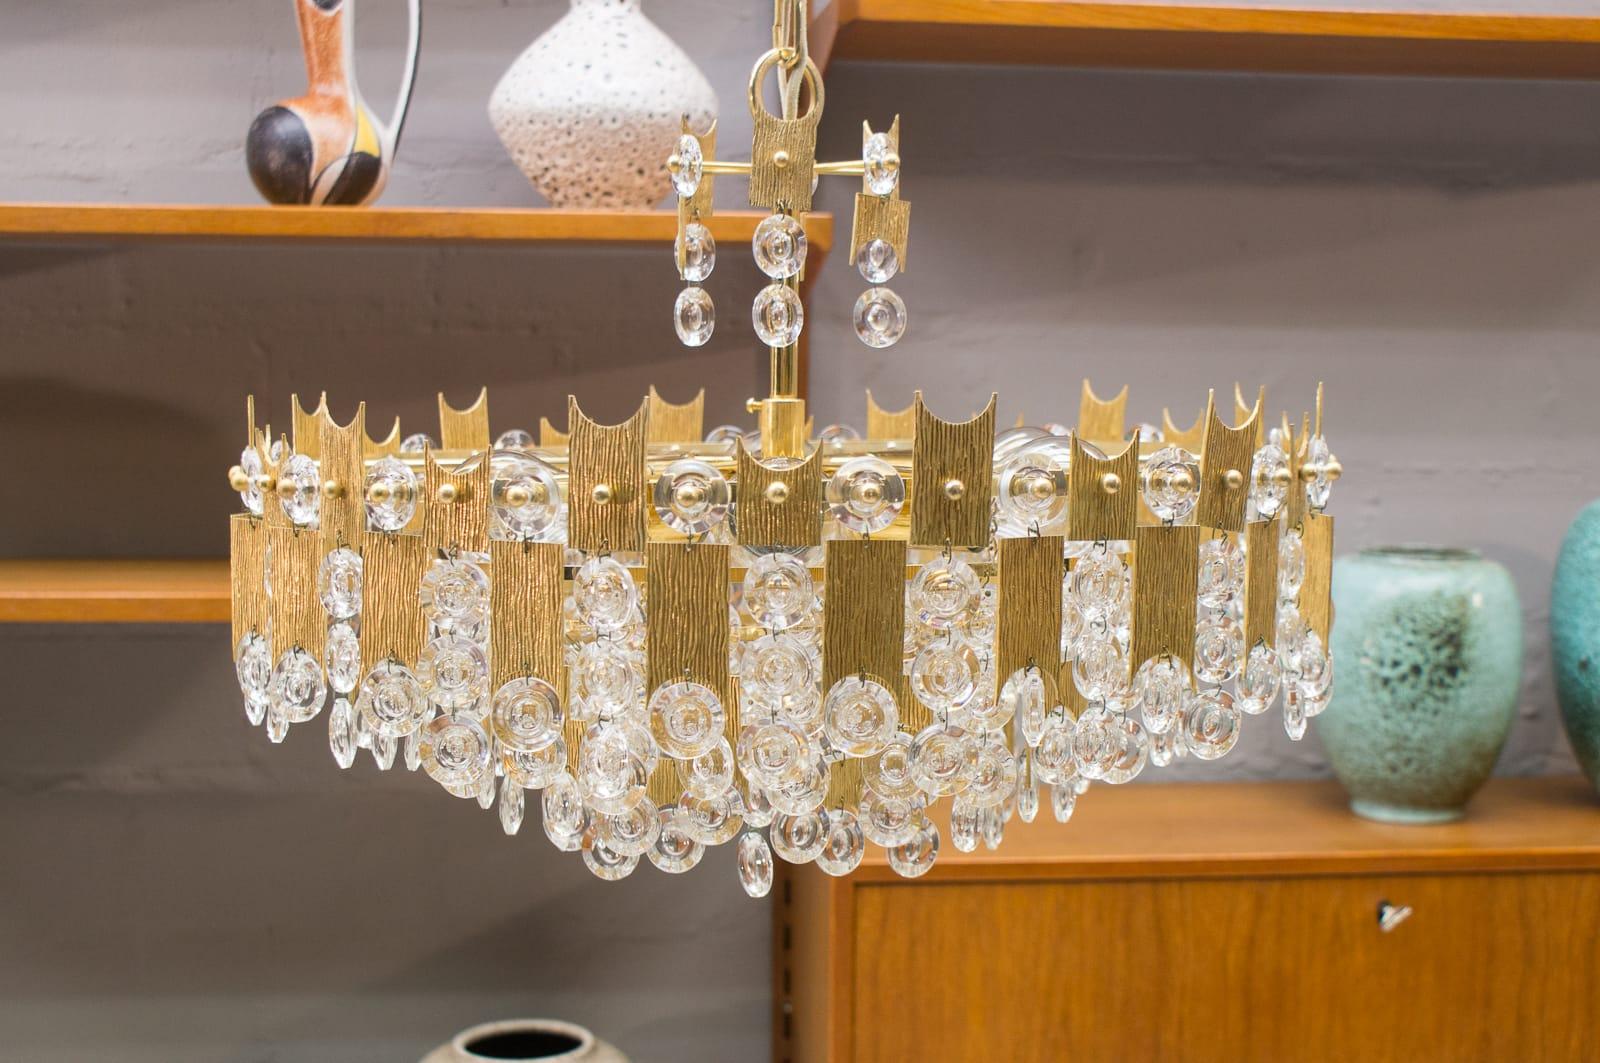 German Midcentury Jeweled Crystal Chandelier by Palwa 'Palme & Walter', 1960s For Sale